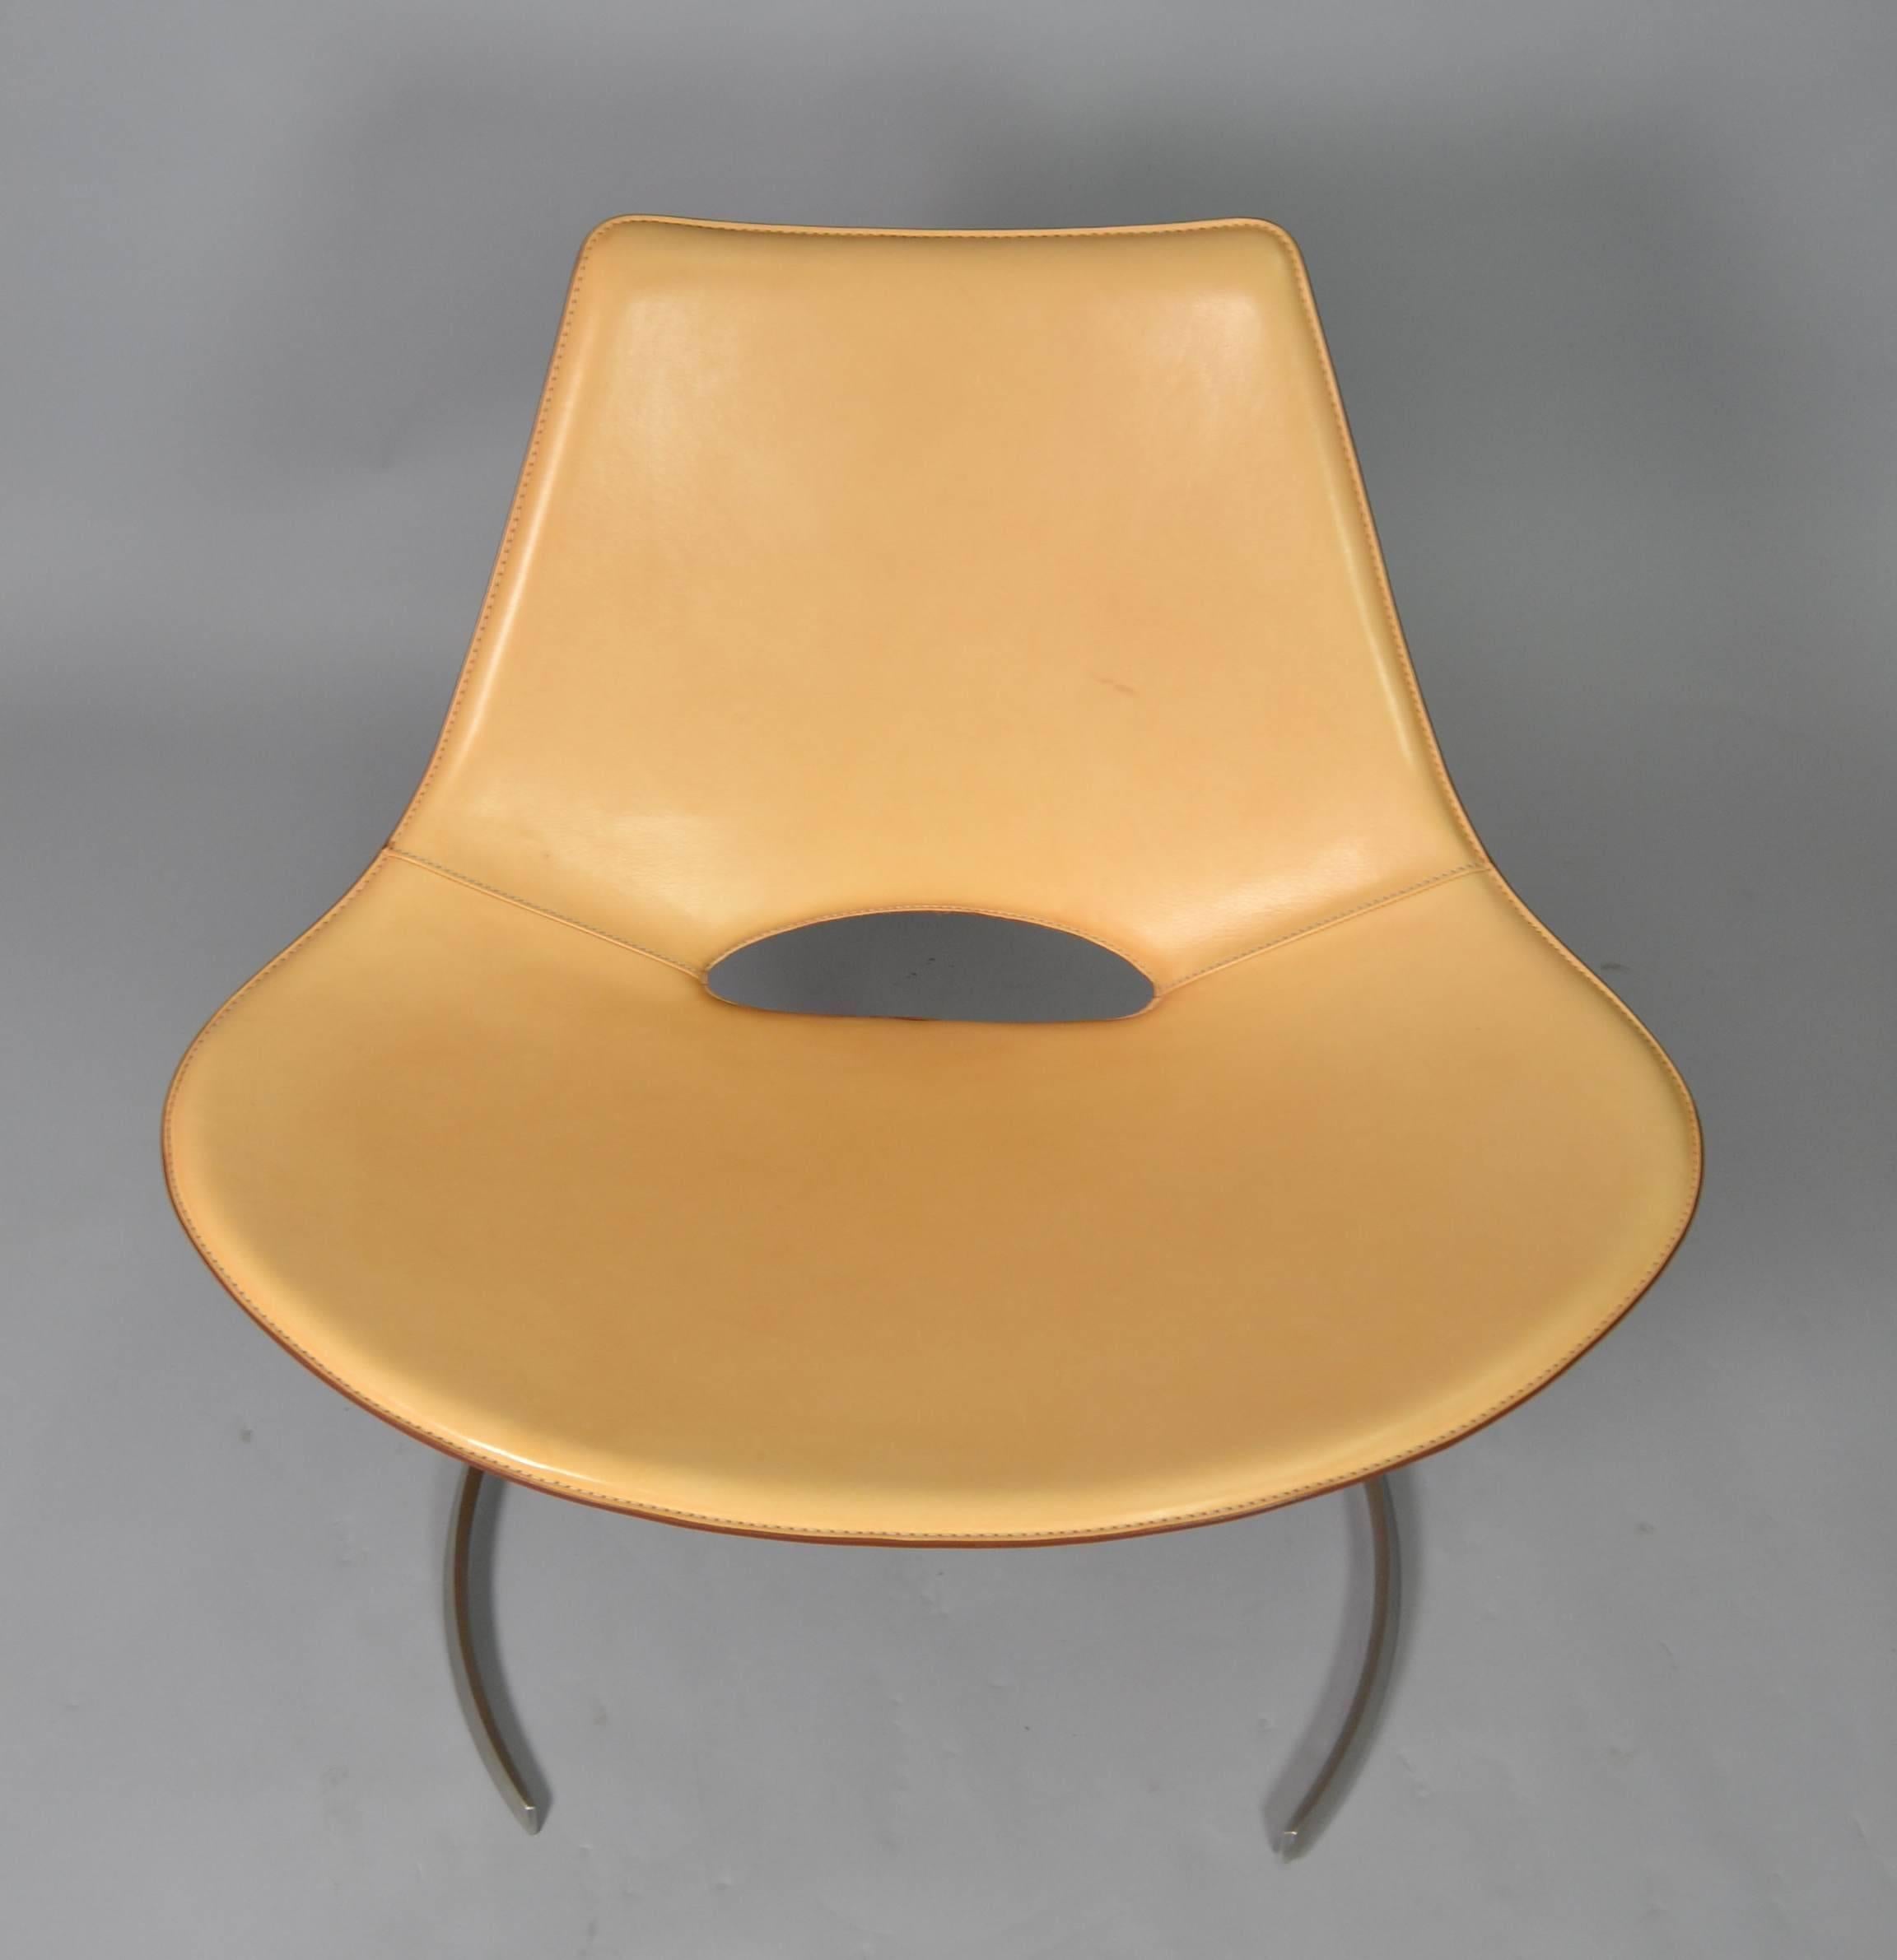 Designed by Jørgen Kastholm and Preben Fabricius in 1963, produced by Bo-Ex, Denmark. Matte chromed steel, shell in wood with upholstery in cognac aniline leather.